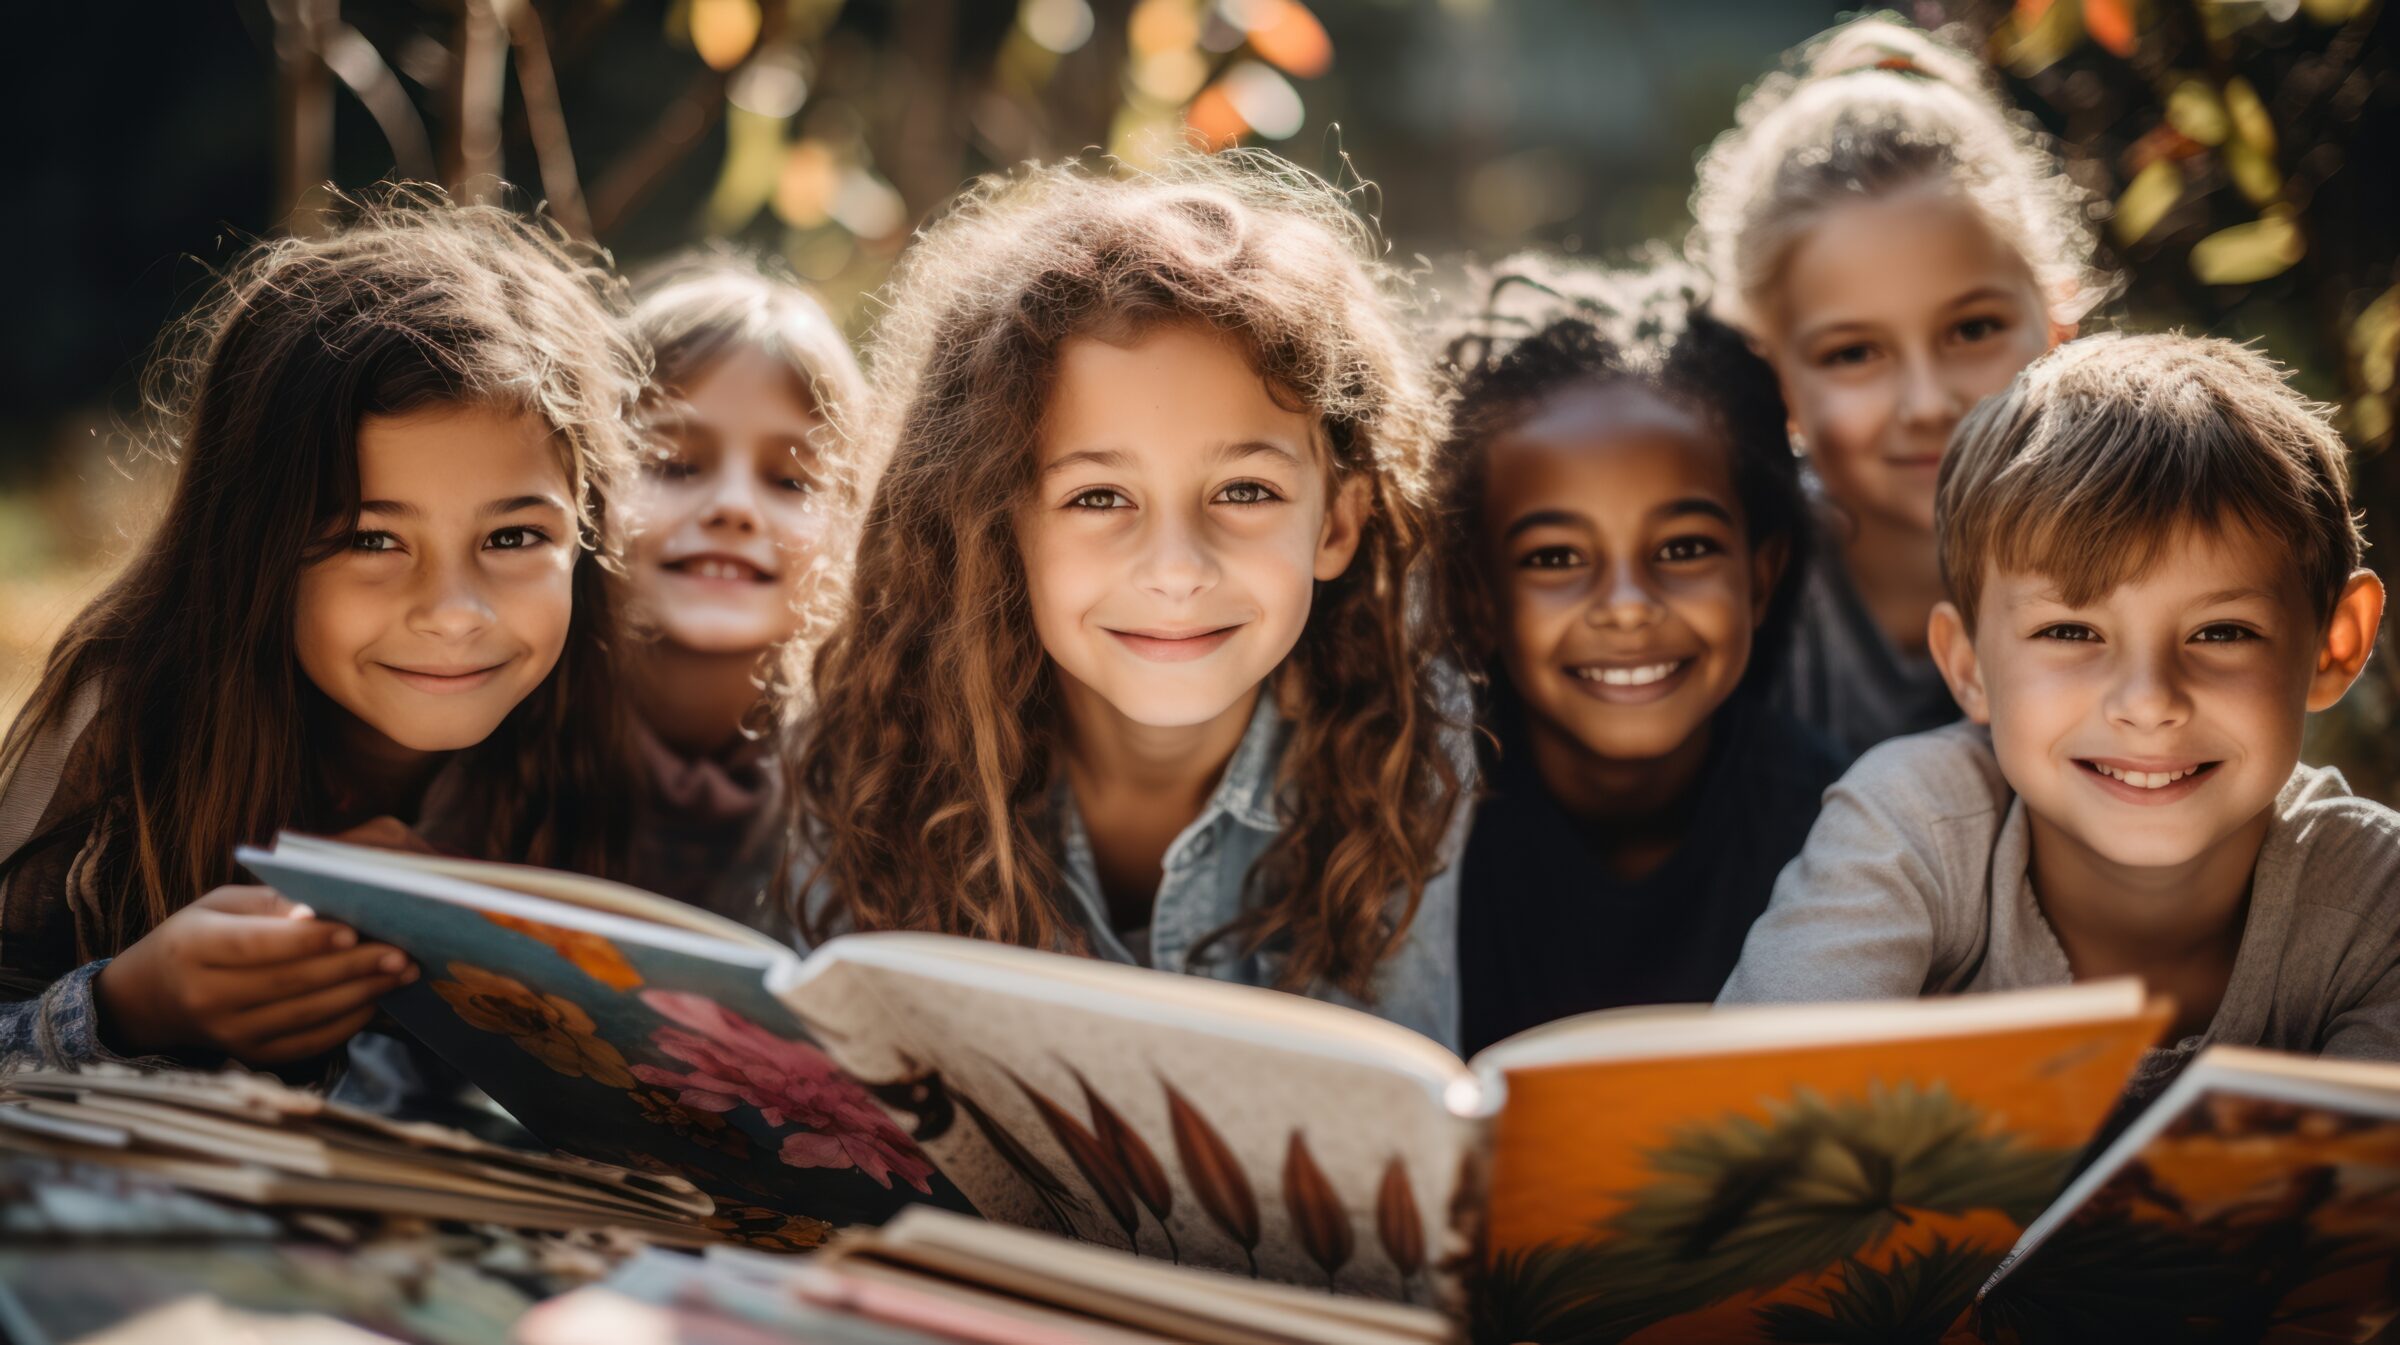 Children, books, and hanging out in the park with friends. Learning or diversity in reading at the school playground. Children, study or education